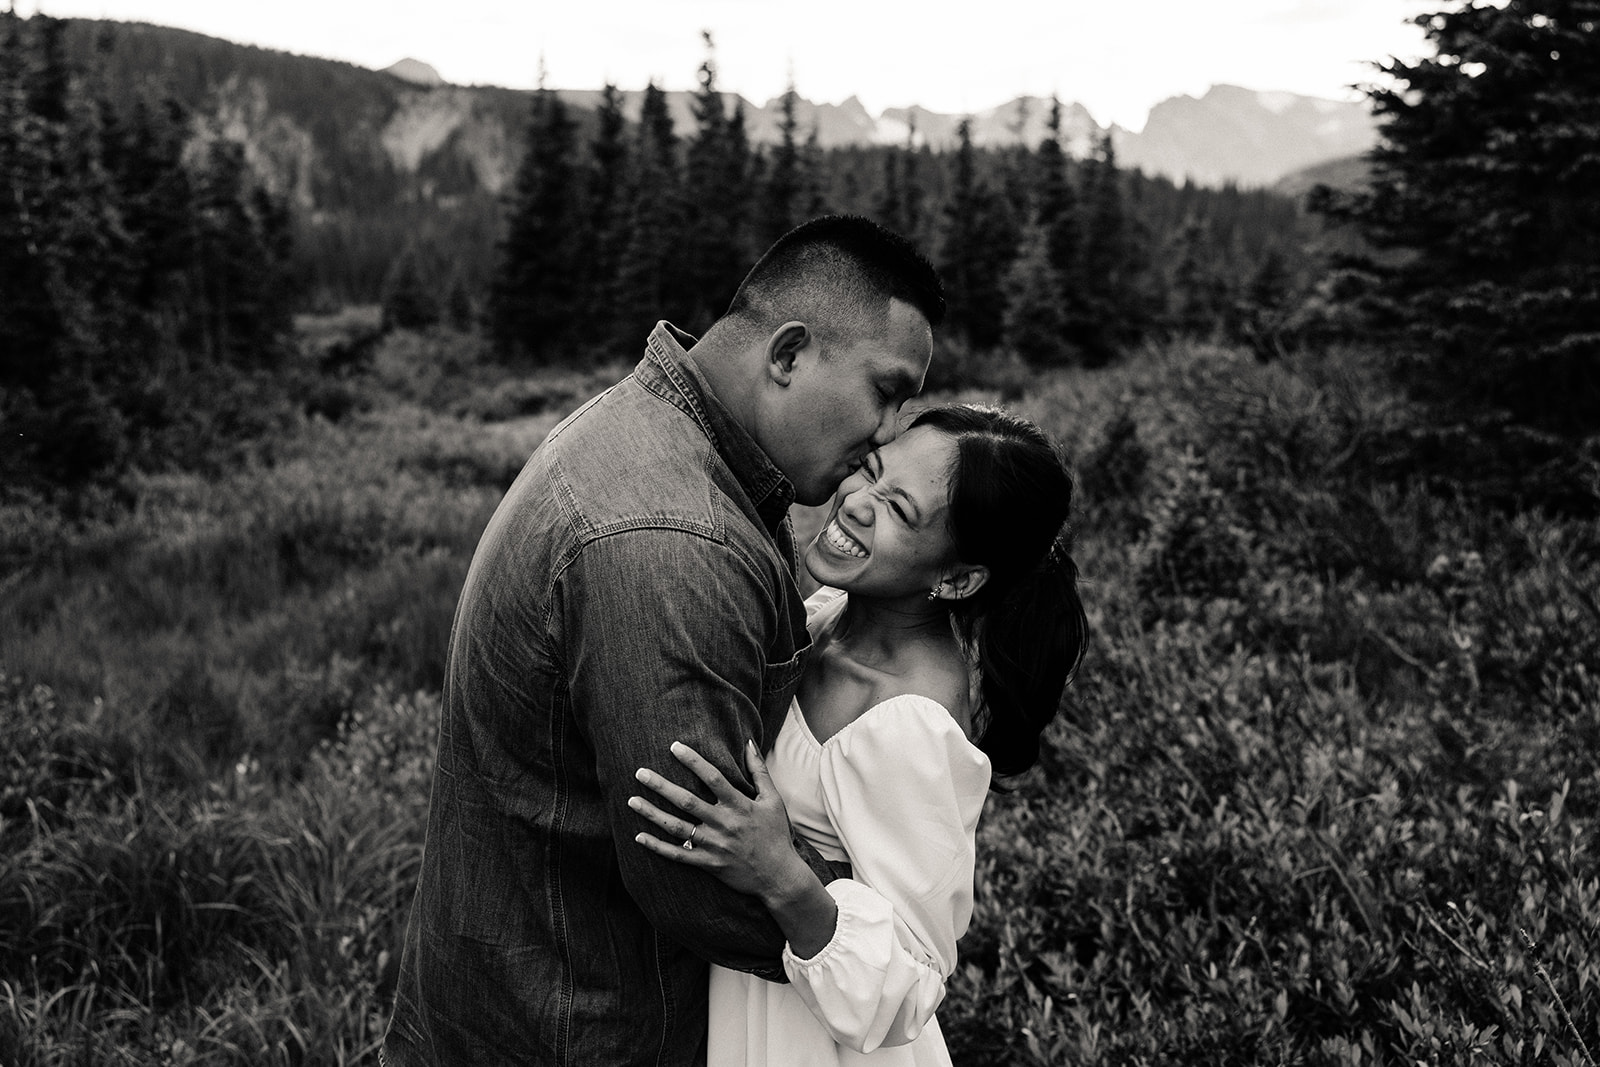 Black and white engagement photo of the pair in the tall grasses, her smiling widely as he sweetly kisses her cheek.